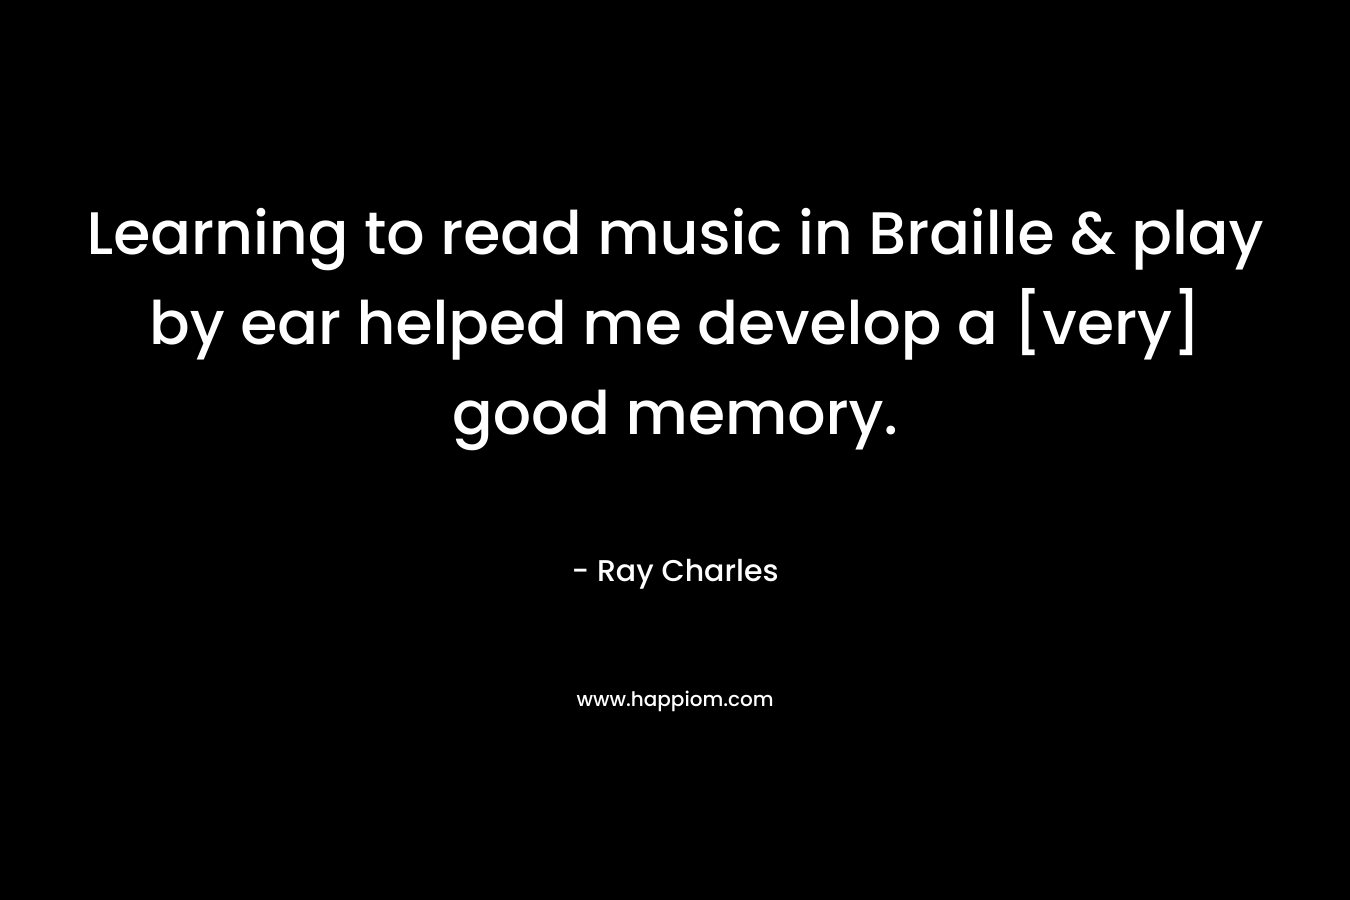 Learning to read music in Braille & play by ear helped me develop a [very] good memory. – Ray Charles